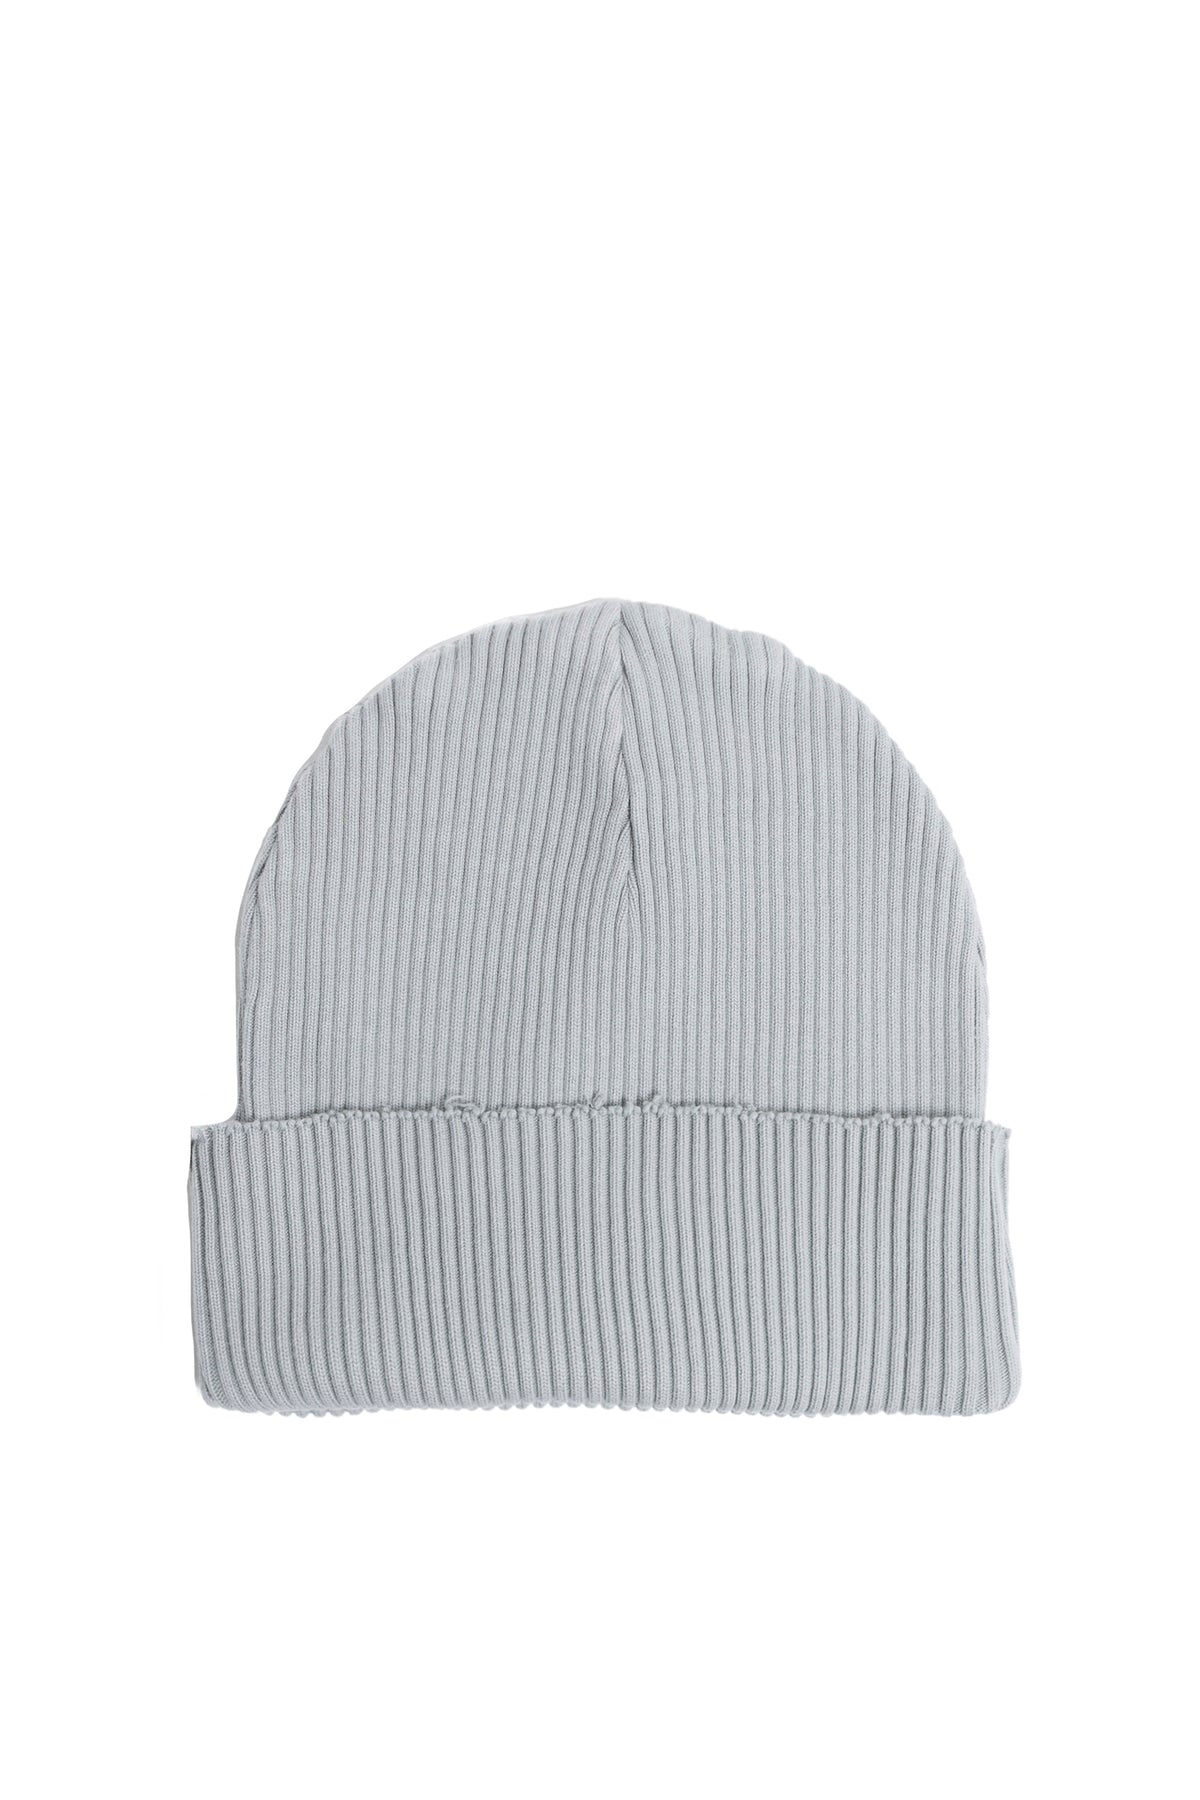 Perfect ribs RIB BEANIE CAP "SMILE PATCH" / GRY